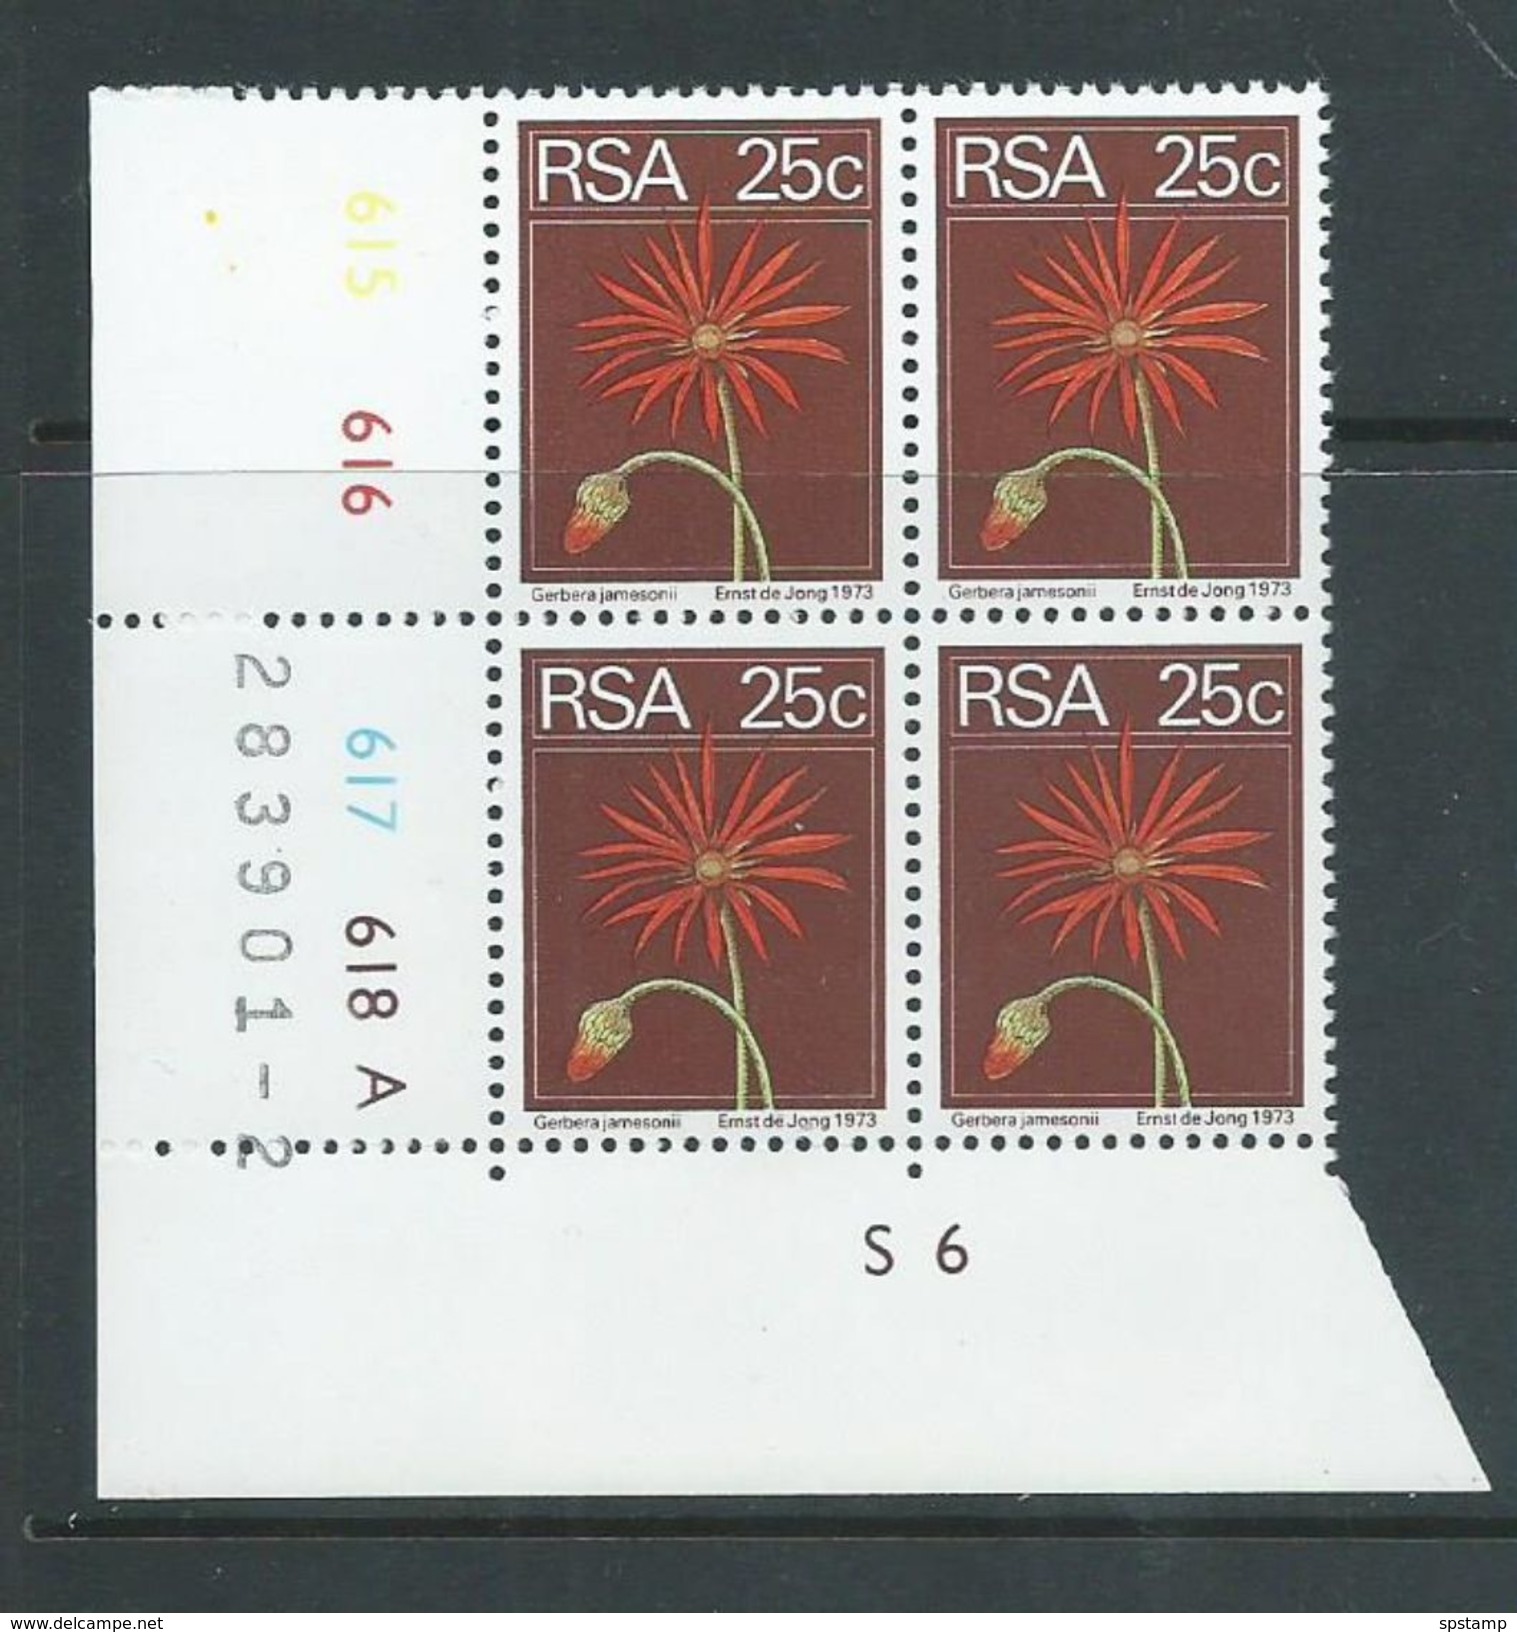 South Africa 1974 25c Daisy Definitive Marginal Block Of 4 MNH - Unused Stamps